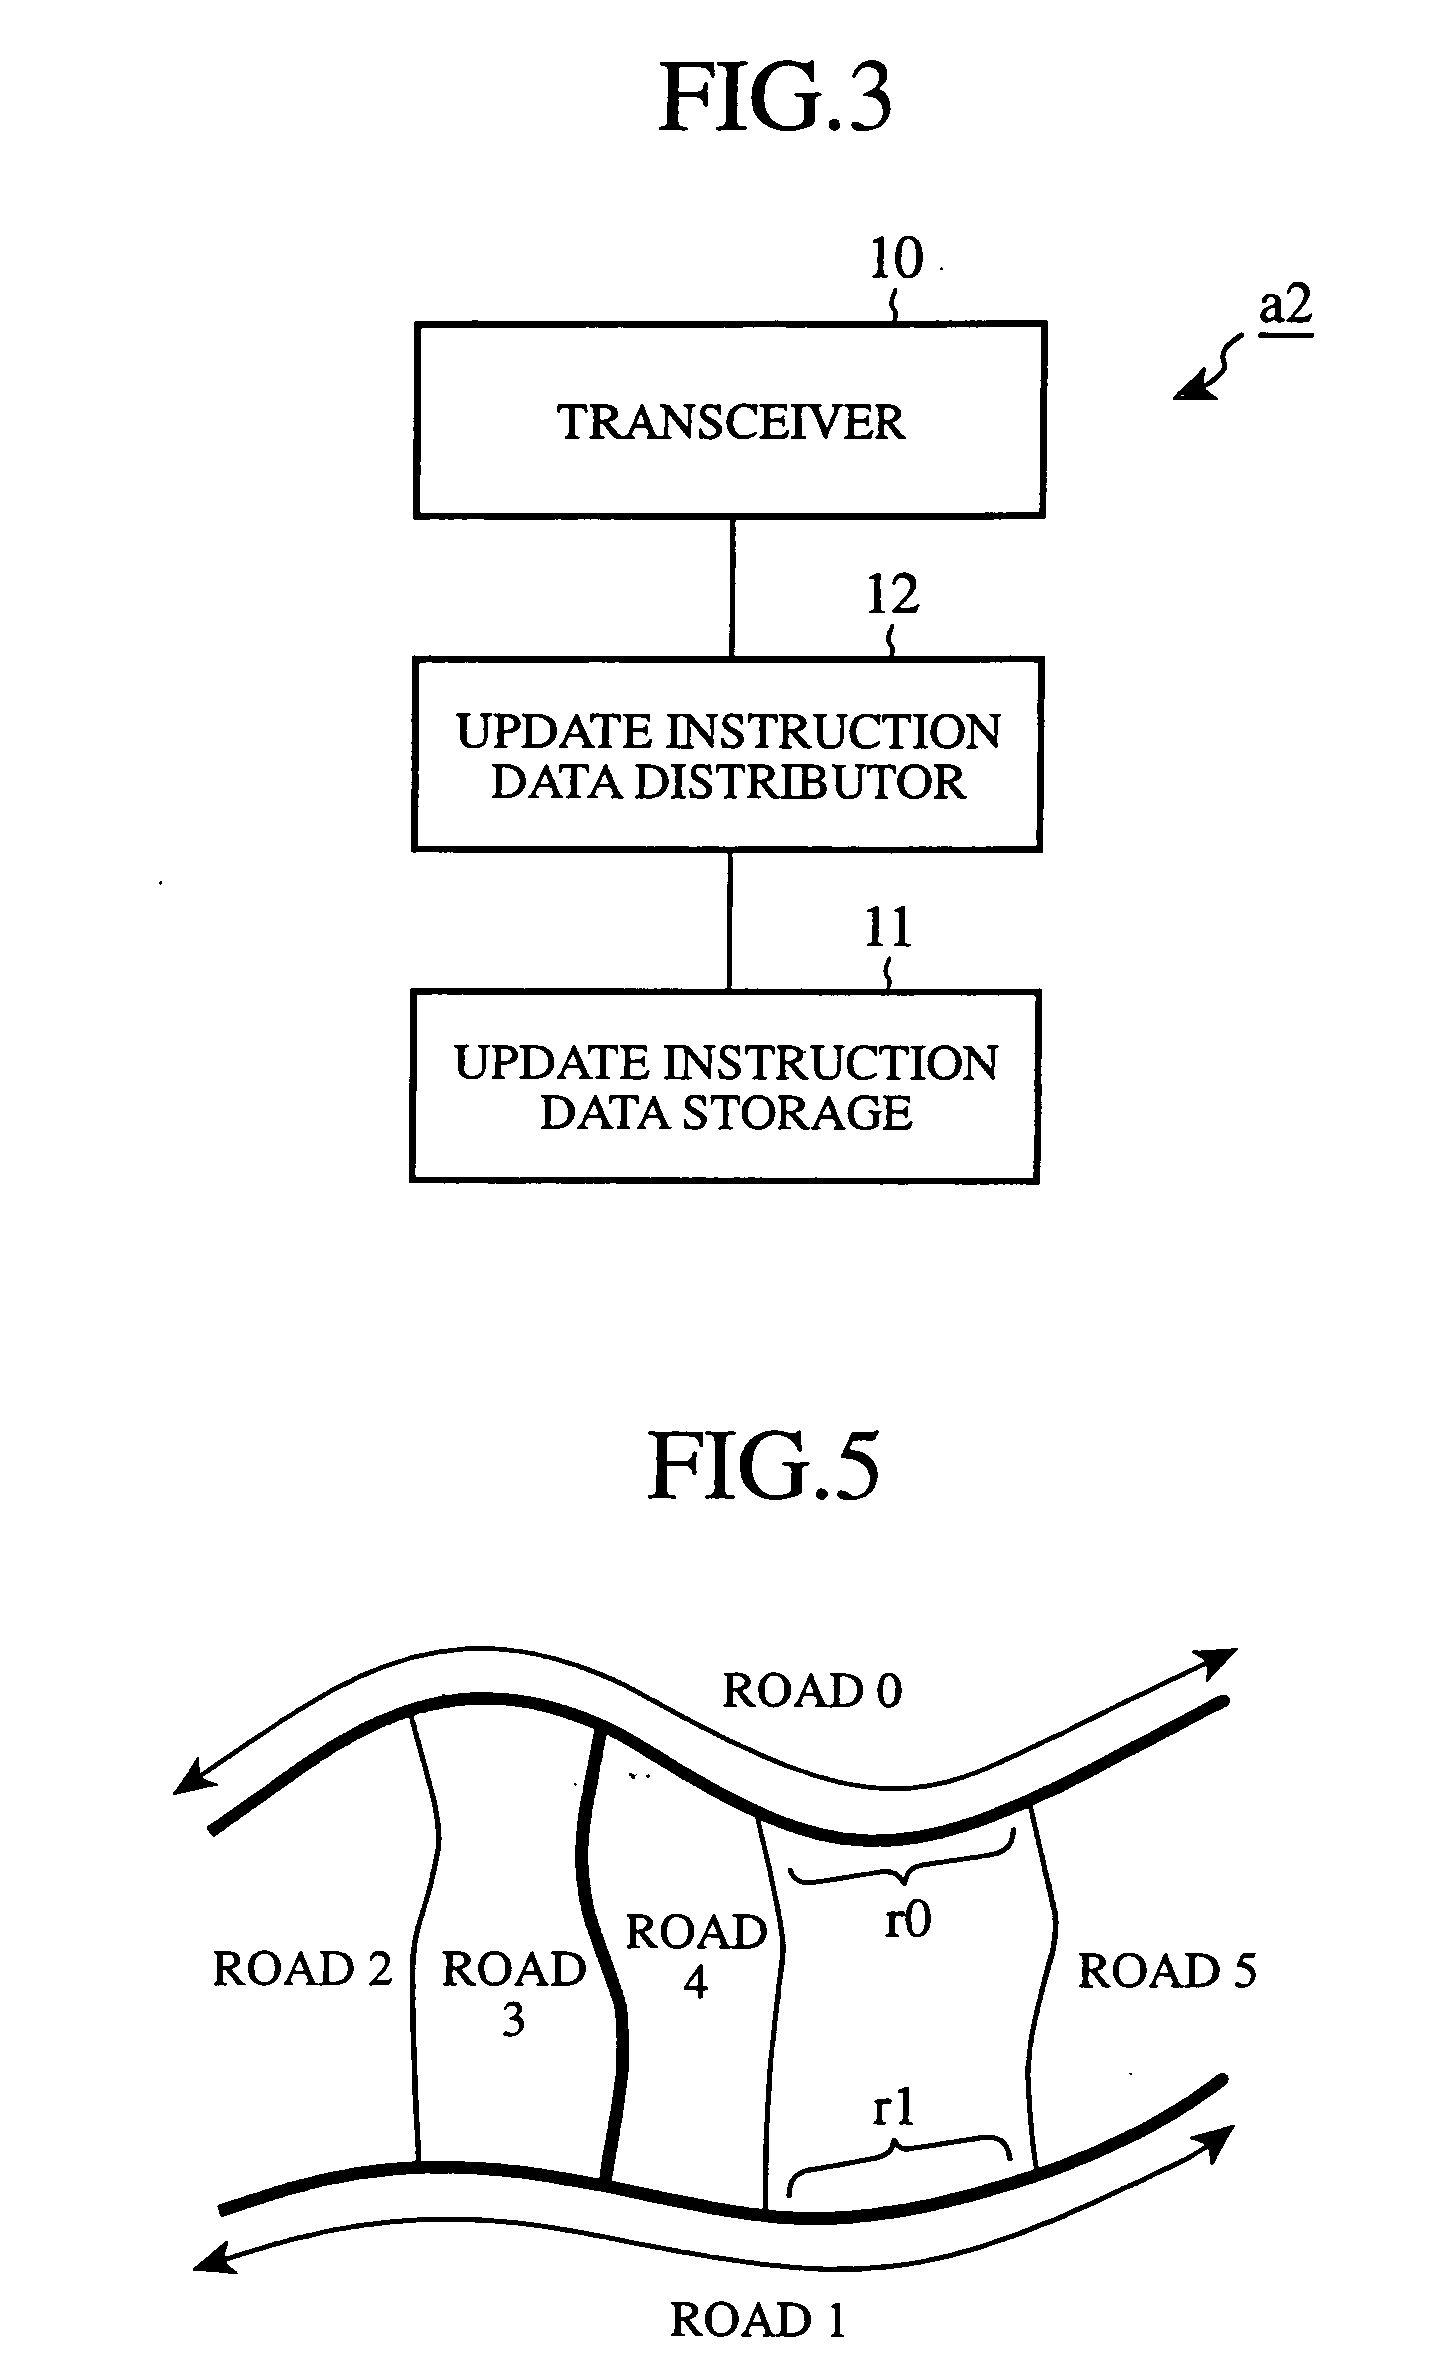 Data architecture of map data, data architecture of update instruction data, map information processing apparatus, and map information providing apparatus